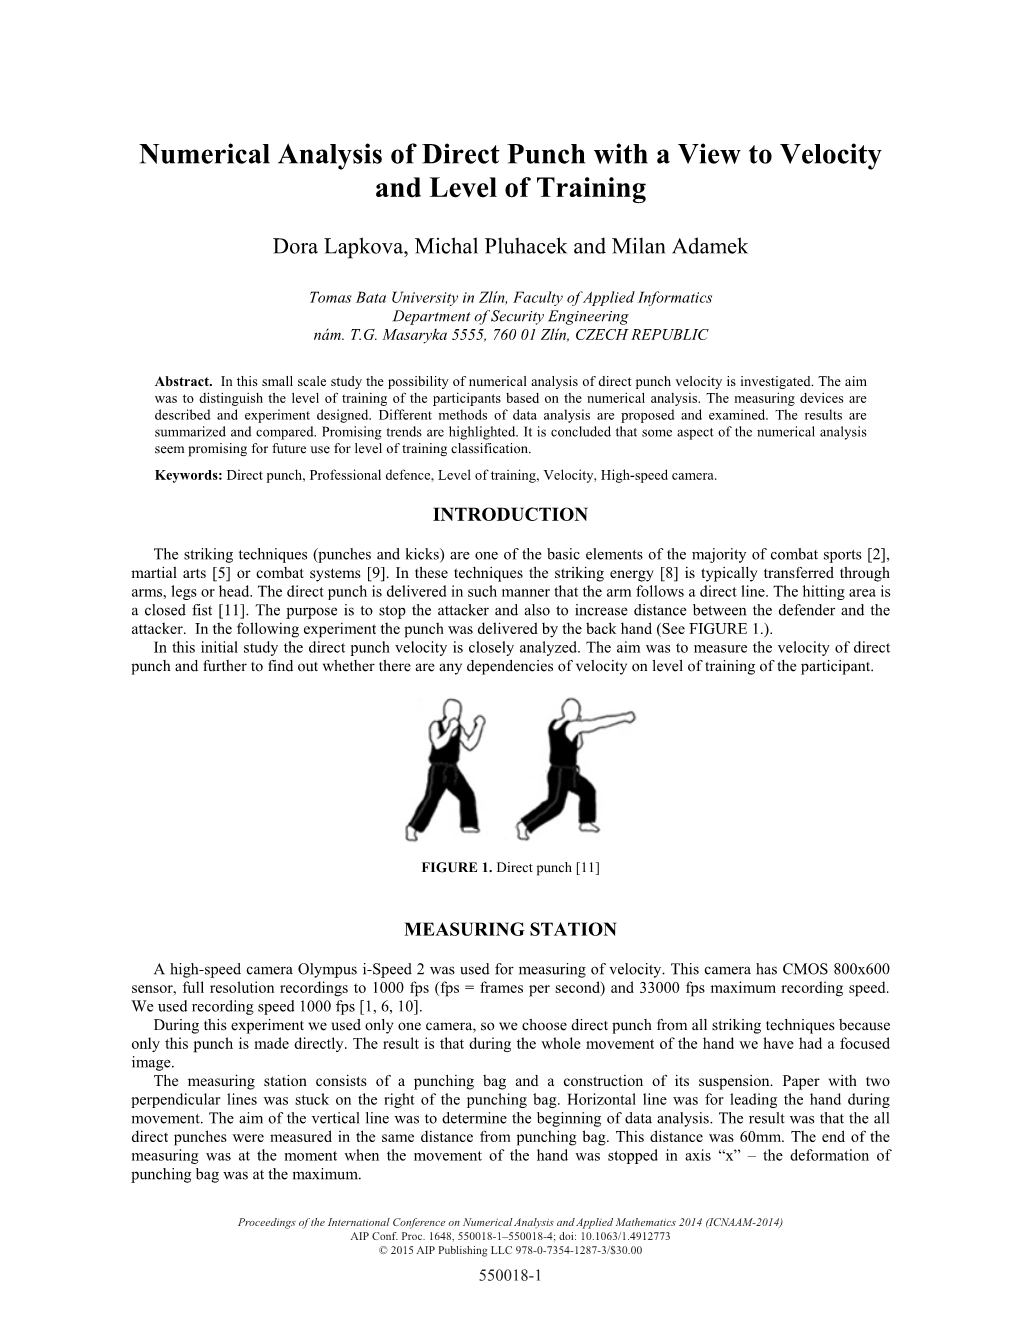 Numerical Analysis of Direct Punch with a View to Velocity and Level of Training